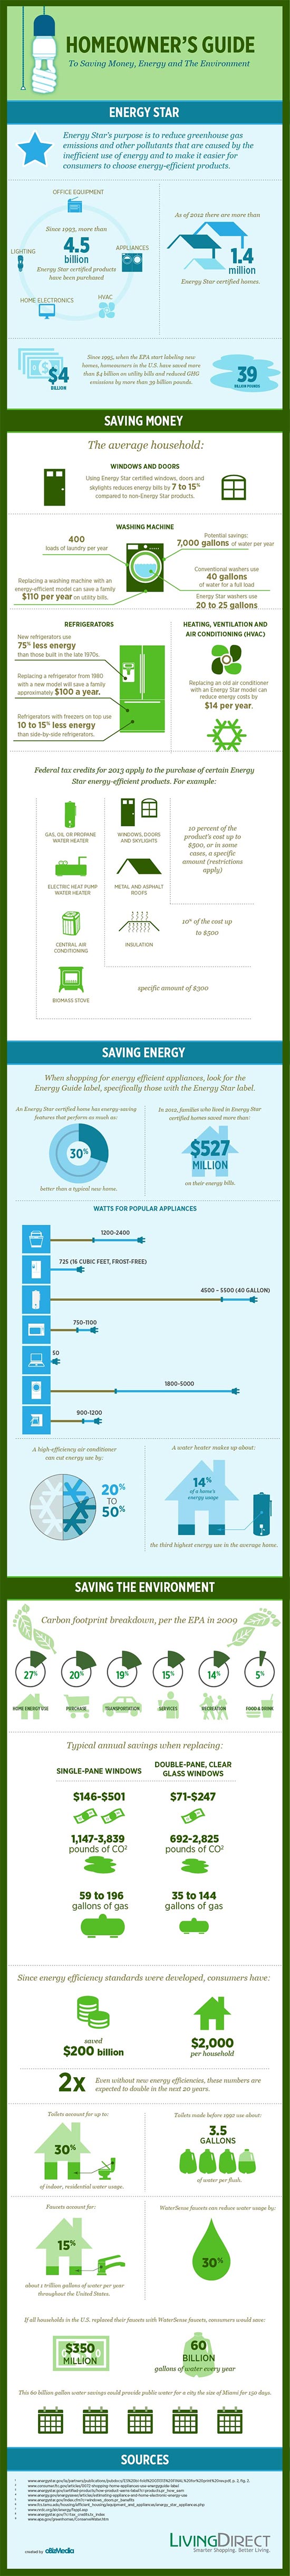 Earth Day Infographic - Guide to Saving Money & Energy